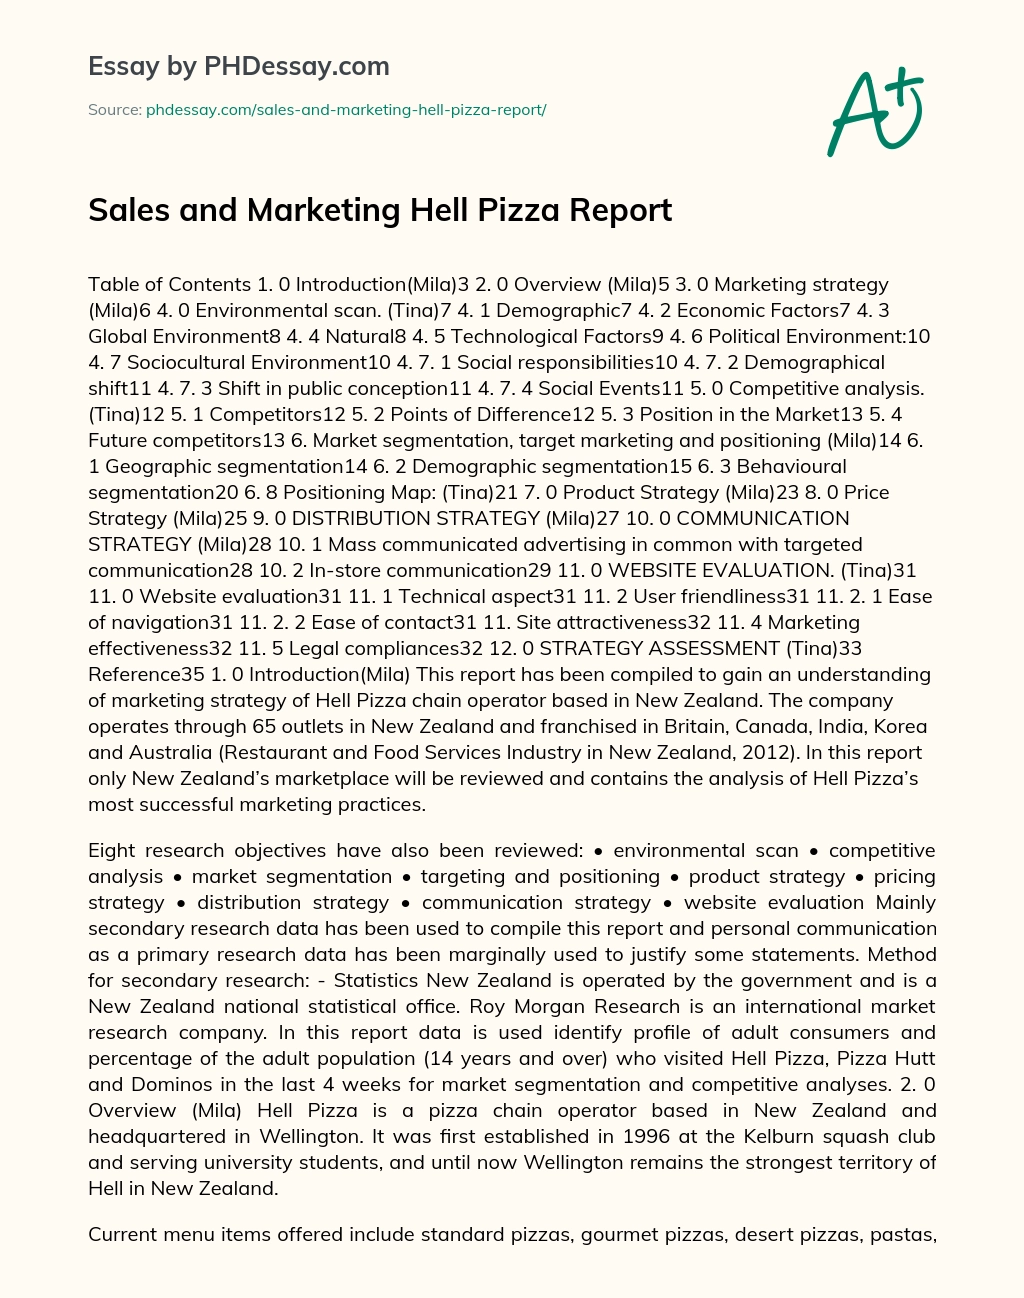 Sales and Marketing Hell Pizza Report essay